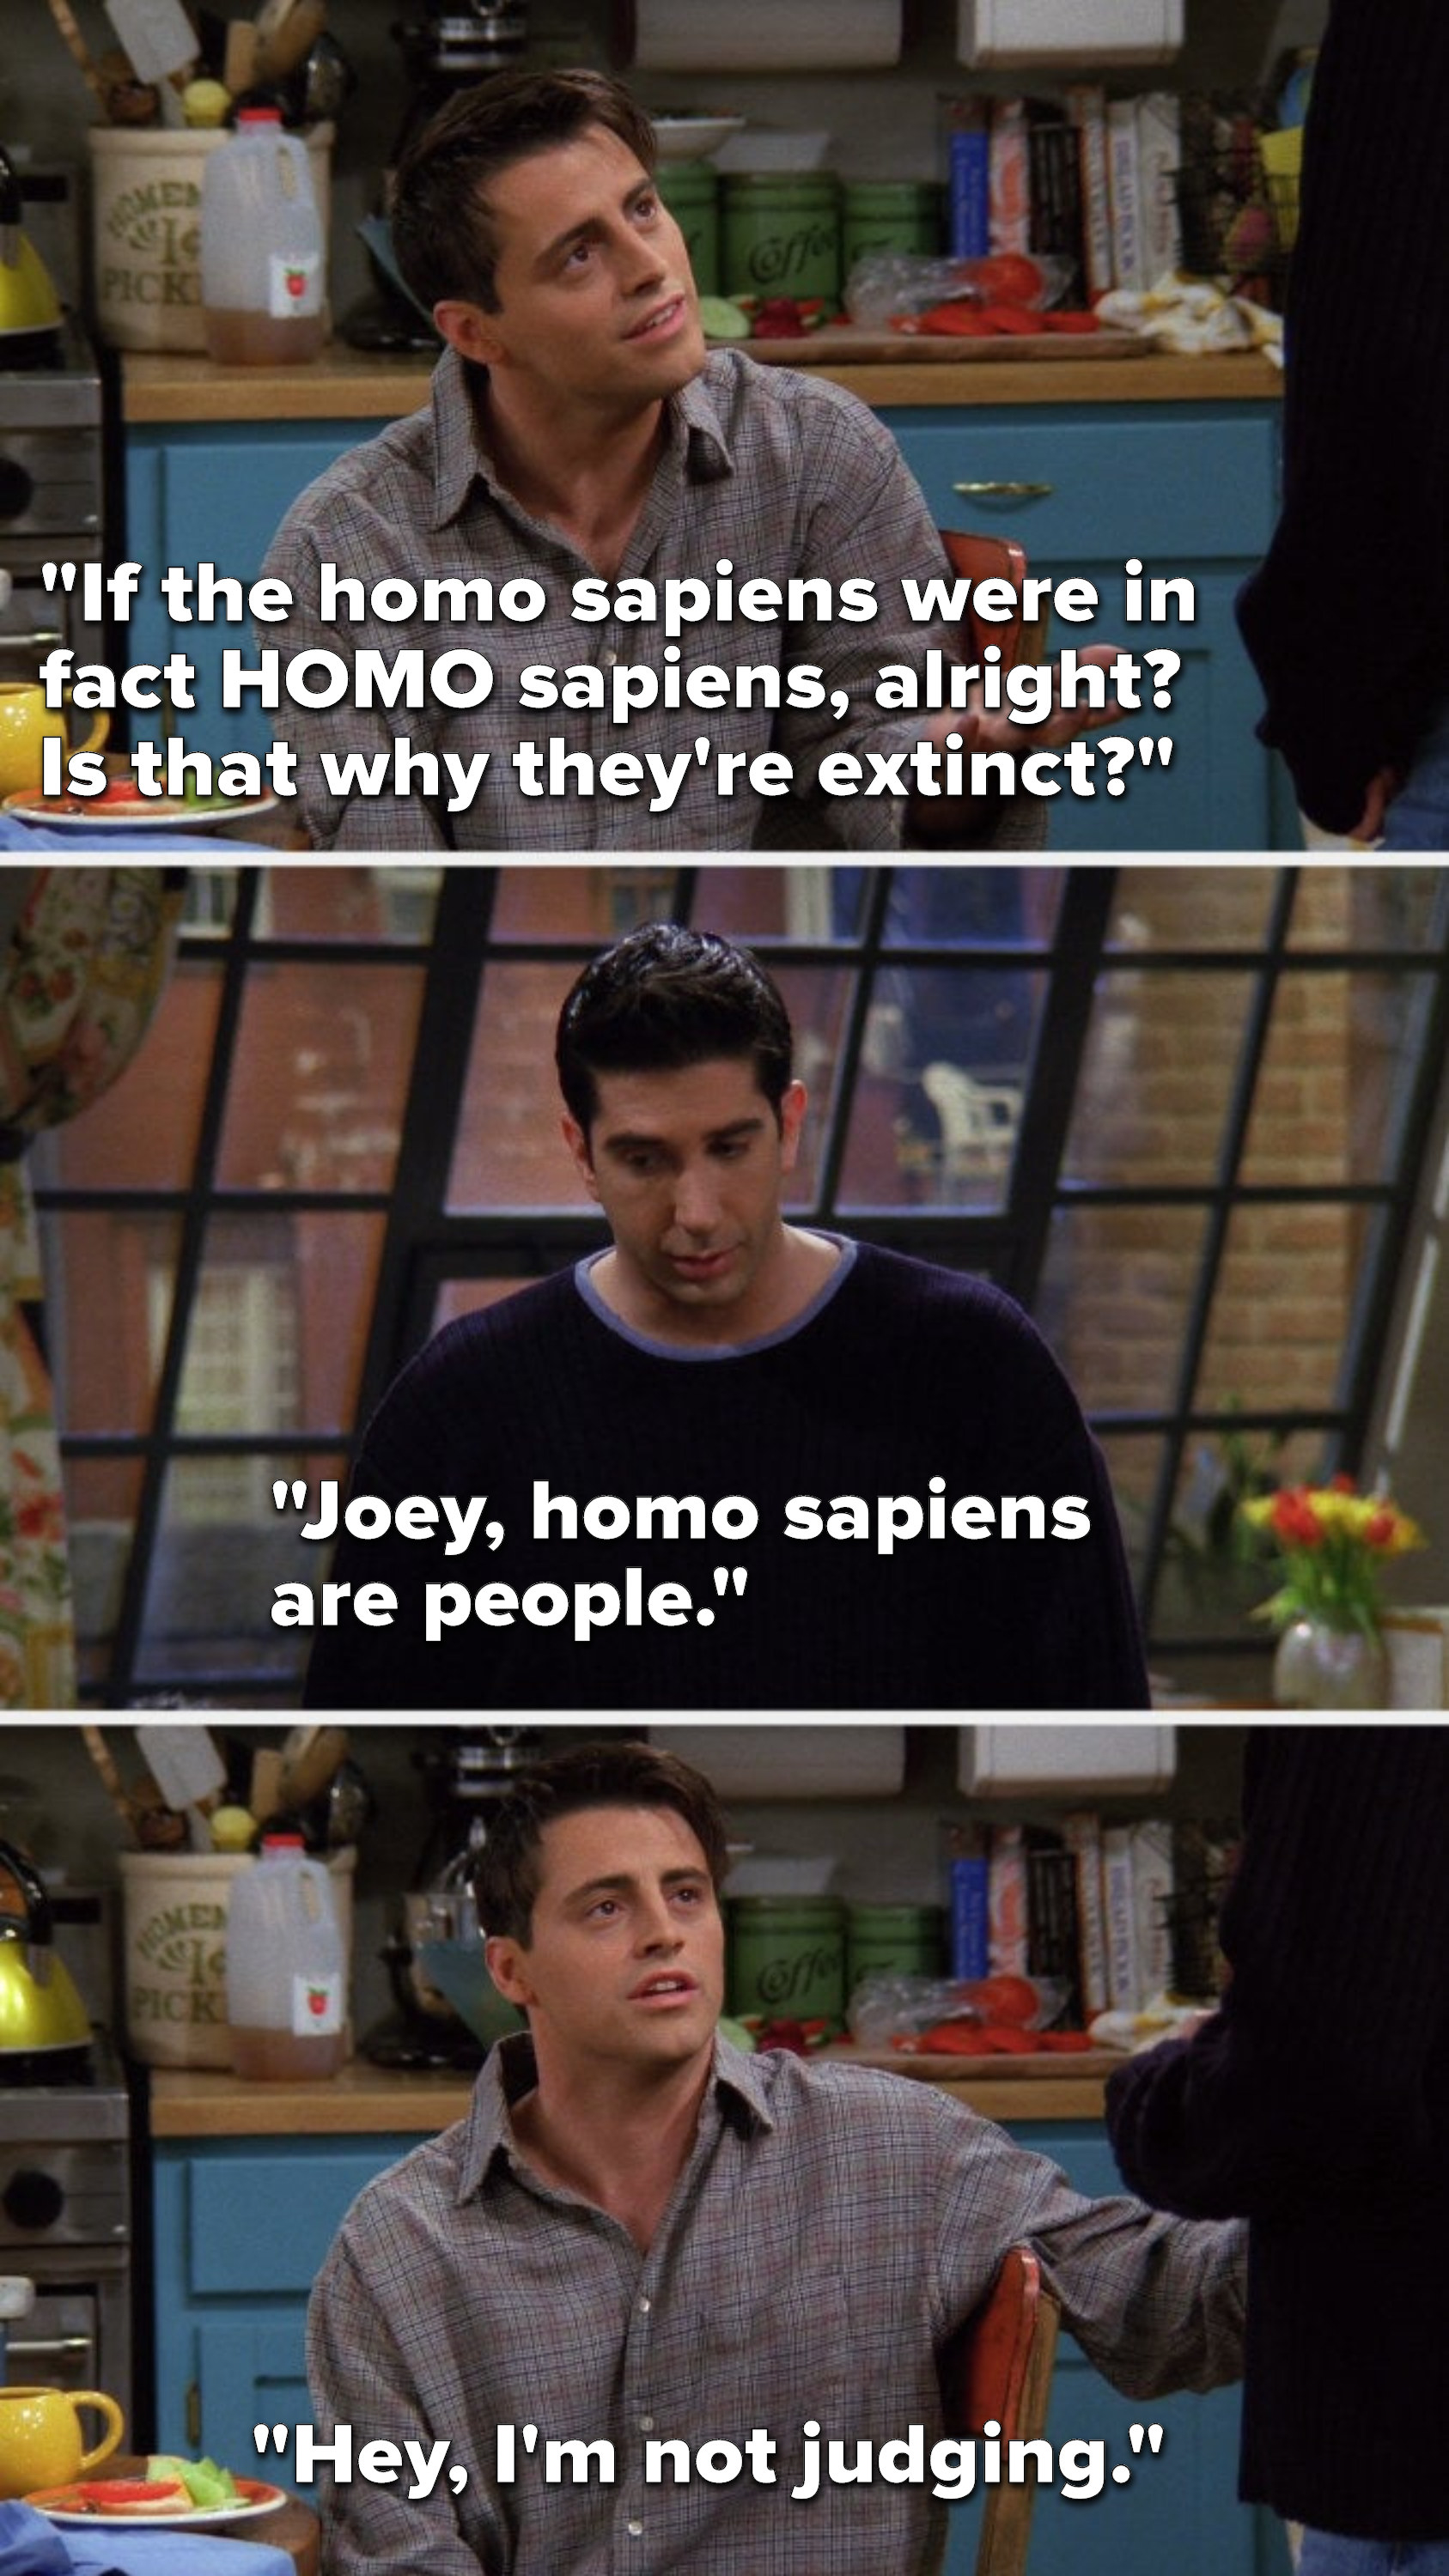 Joey says, &quot;If the homo sapiens were in fact HOMO sapiens, alright, is that why they&#x27;re extinct,&quot; Ross says, Joey, homo sapiens are people,&quot; and Joey says, &quot;Hey, I&#x27;m not judging&quot;